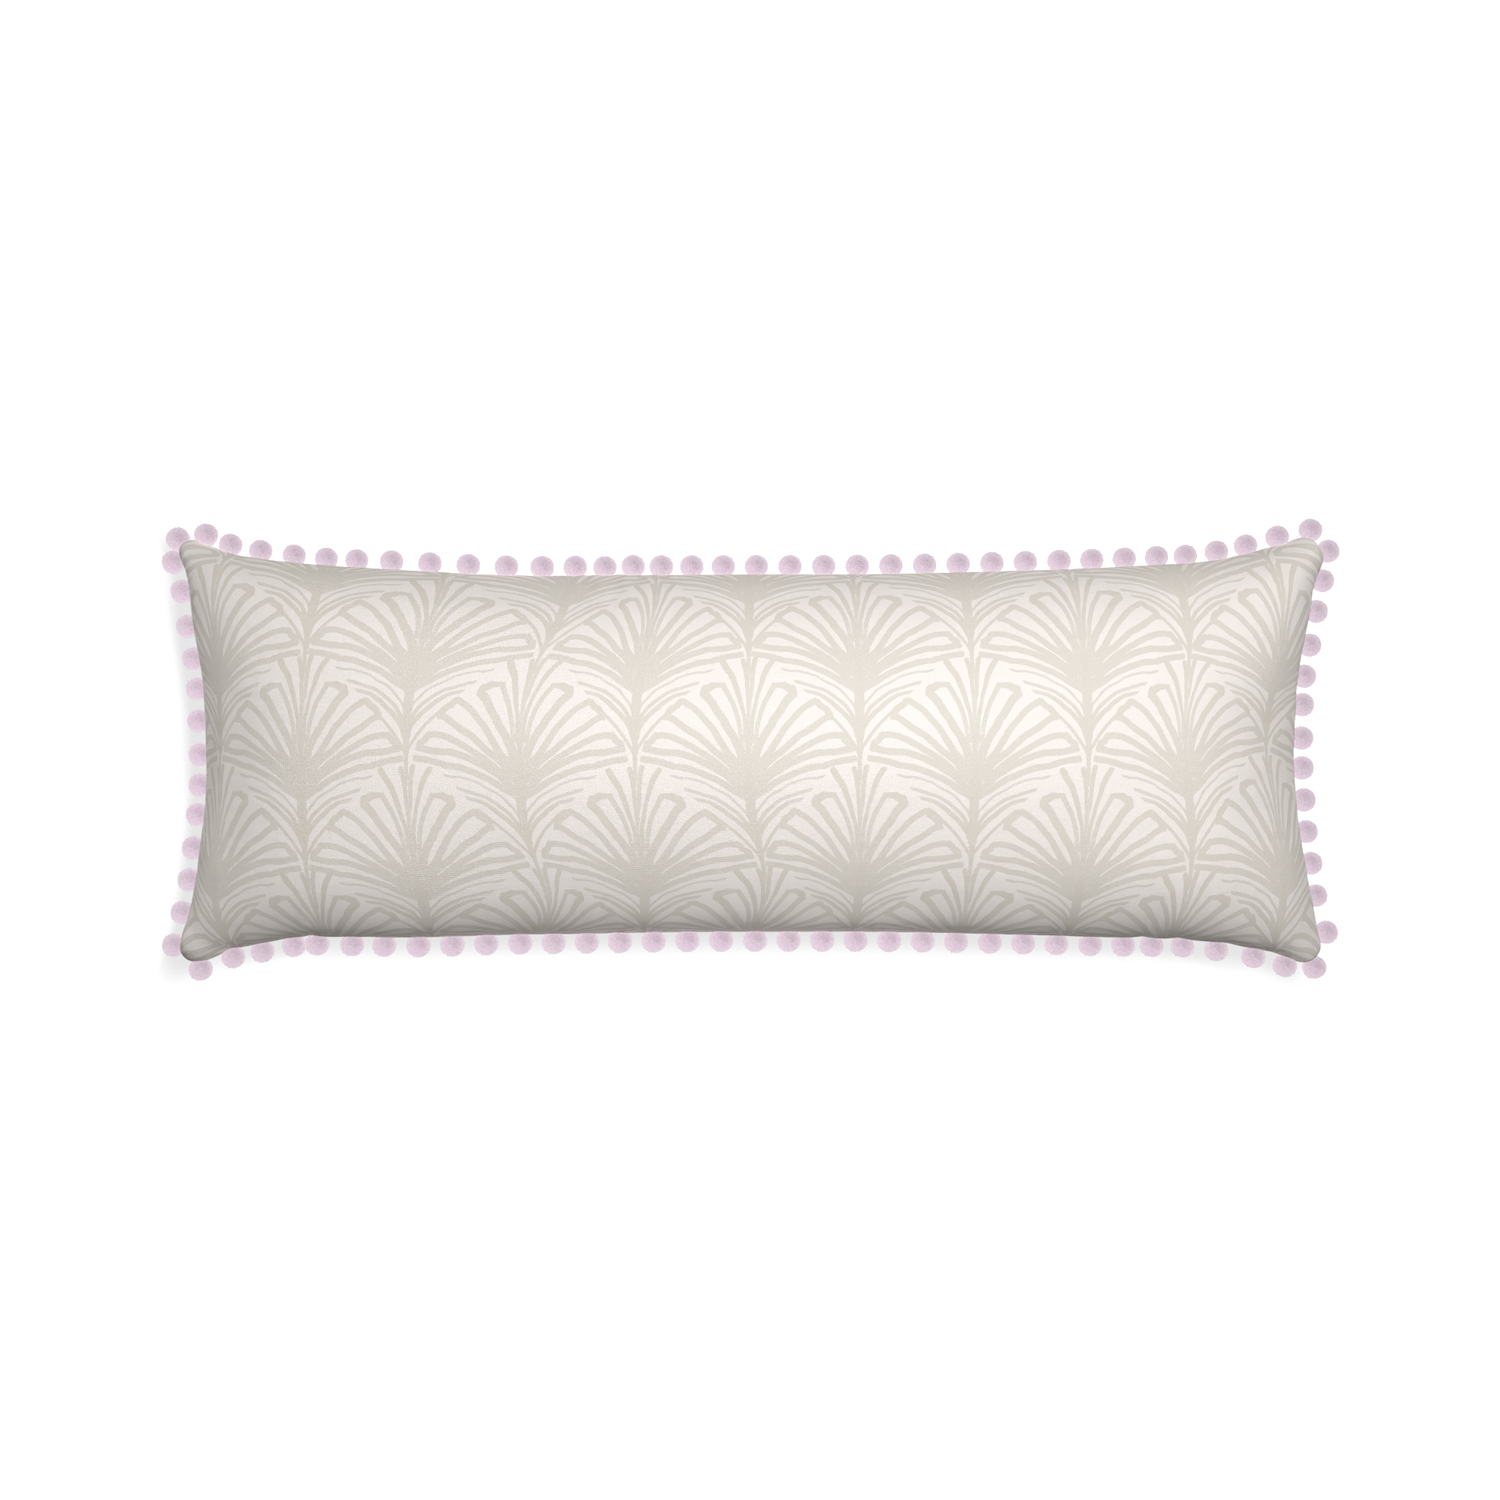 Xl-lumbar suzy sand custom pillow with l on white background